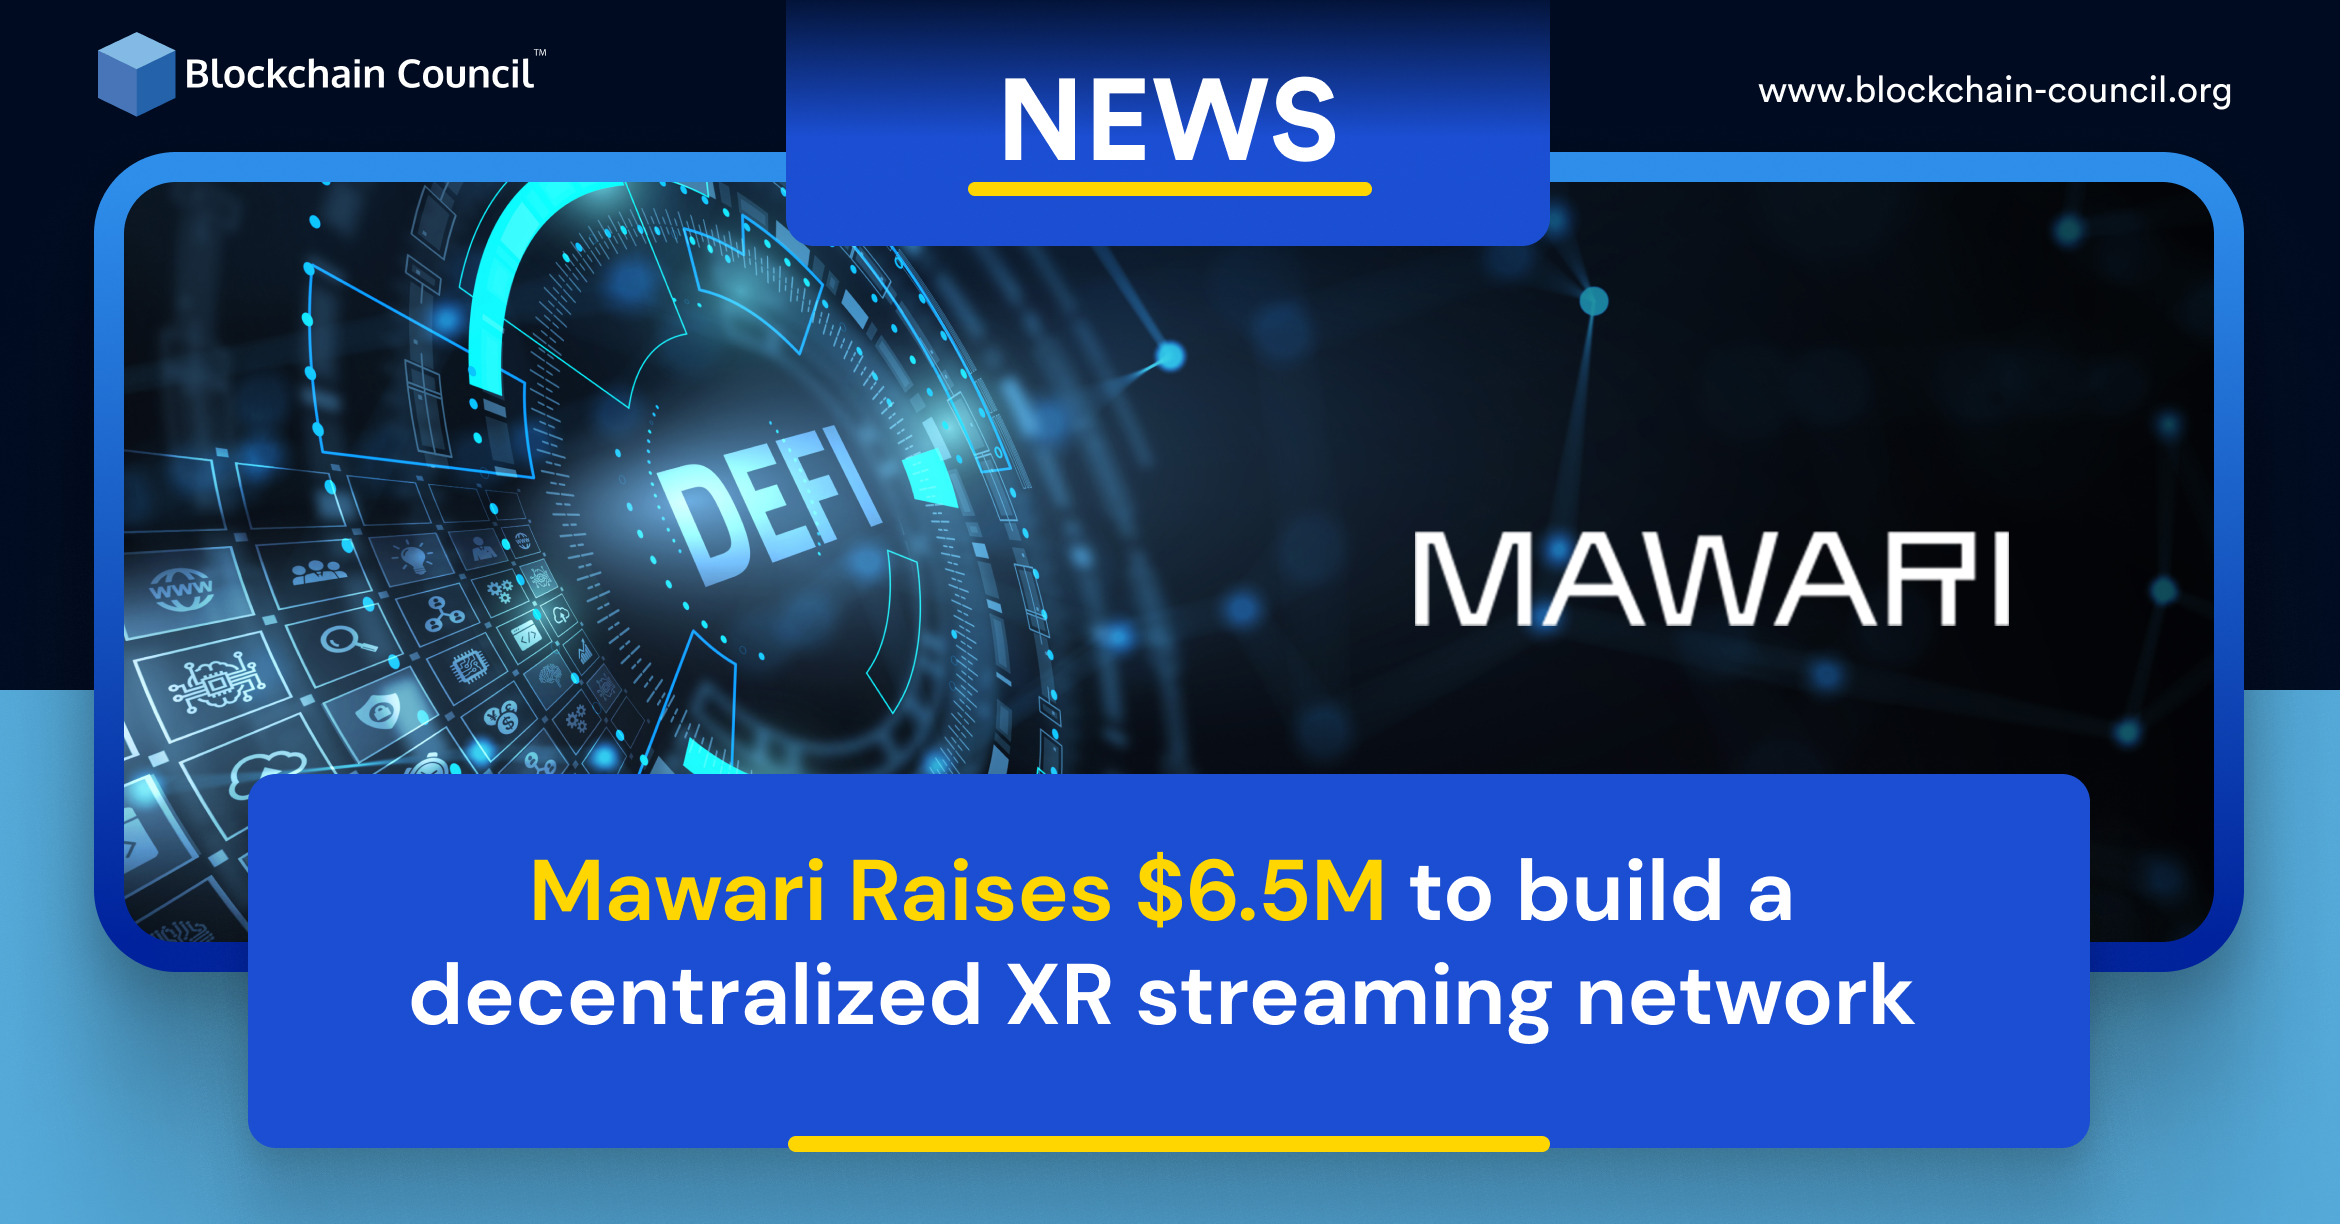 Mawari Raises $6.5M to Build a Decentralized XR Streaming Network